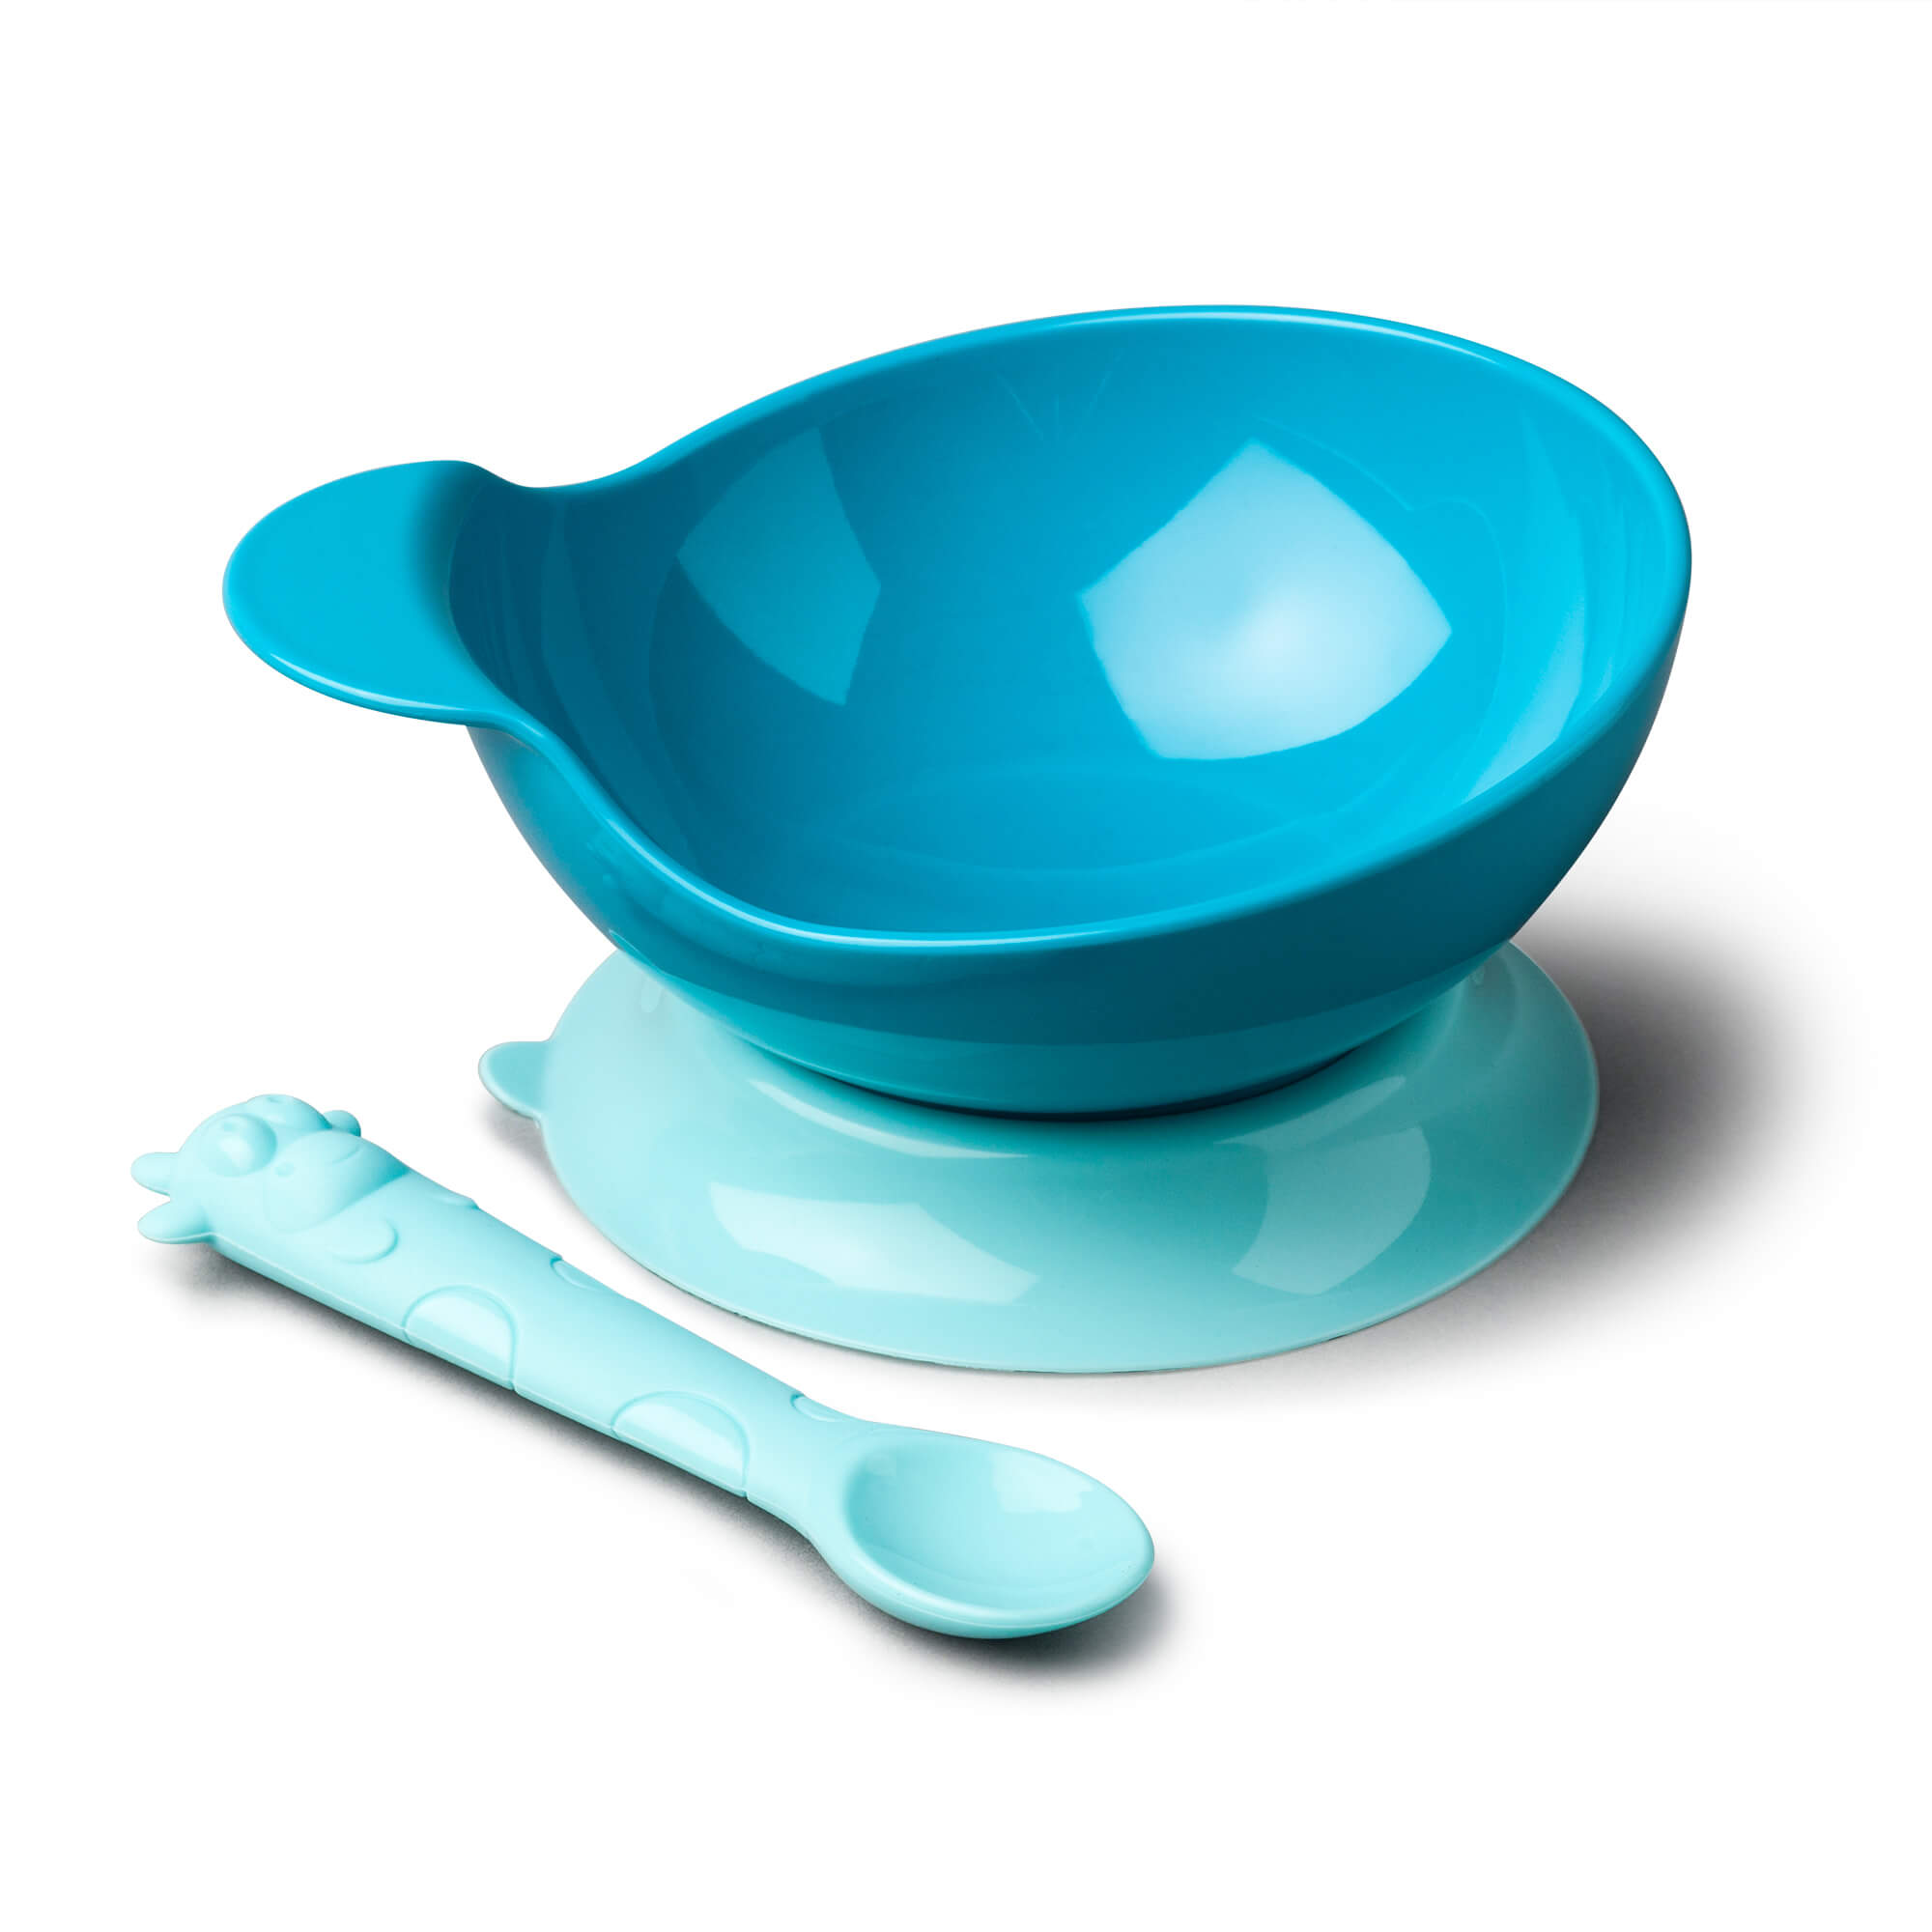 Zeal Silicone Baby Bowl and Spoon Set in Sky Blue